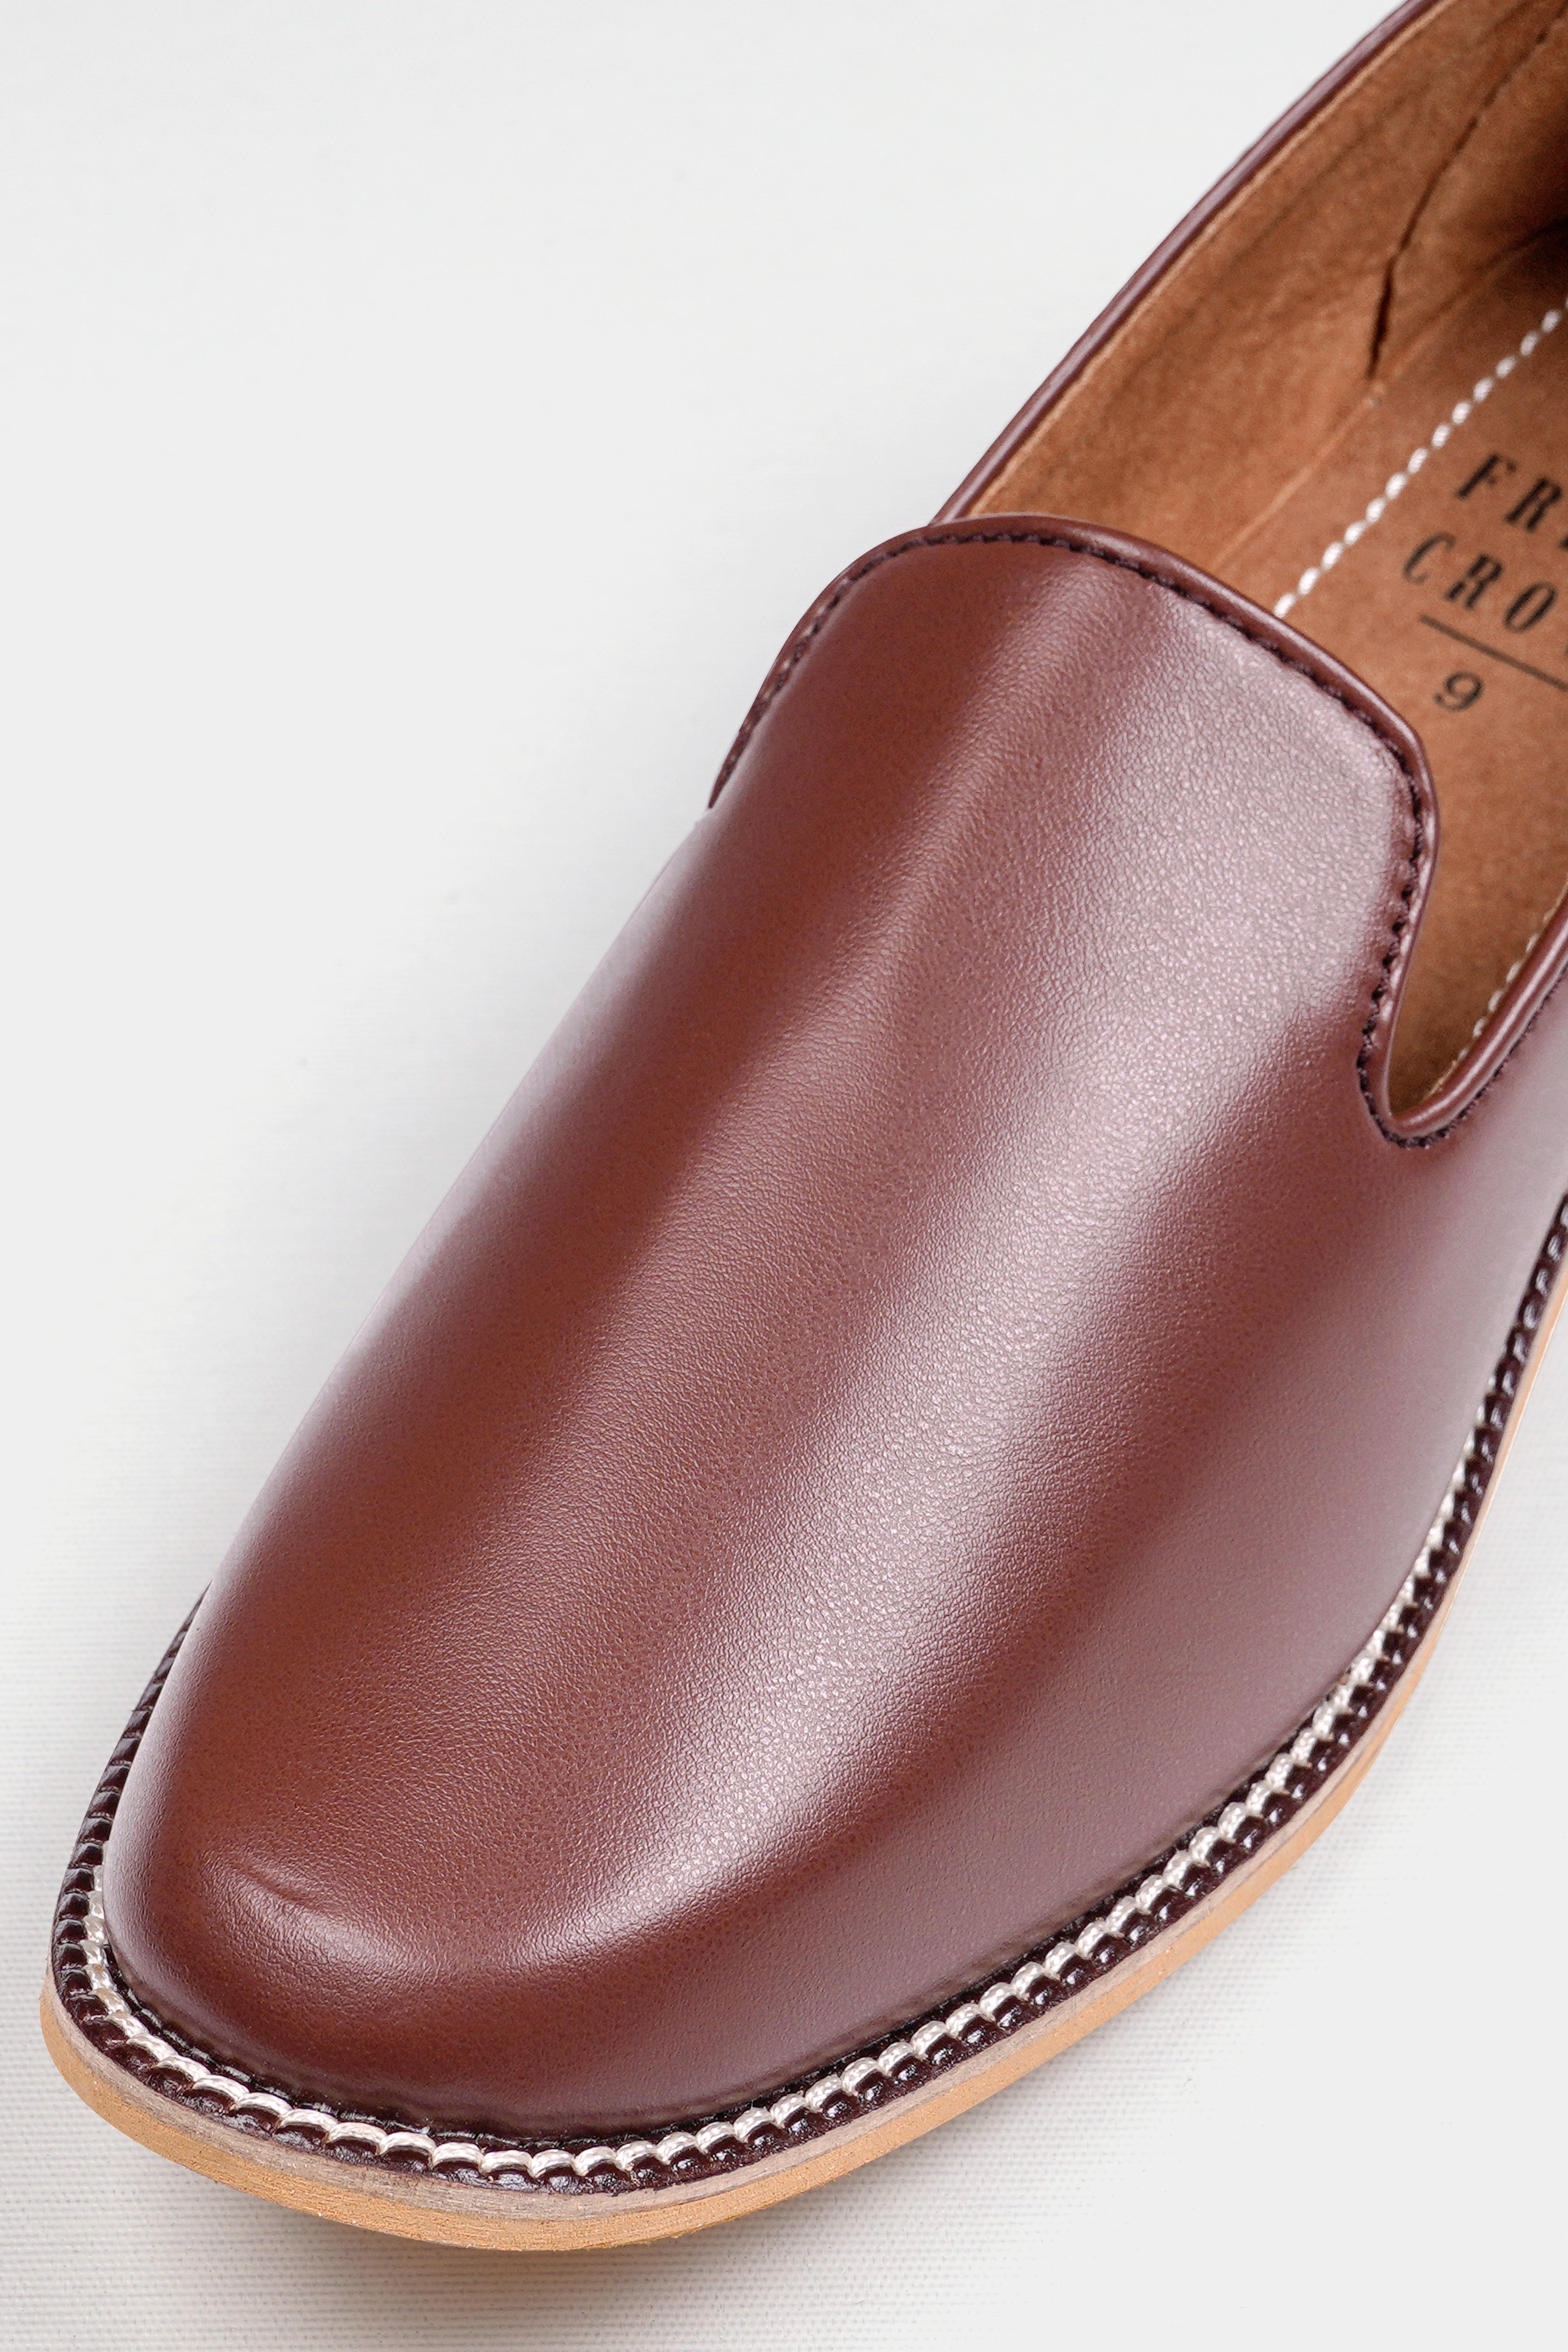 Brown Vegan Leather Hand Stitched Mojri Slip-On Shoes FT150-6, FT150-7, FT150-8, FT150-9, FT150-10, FT150-11